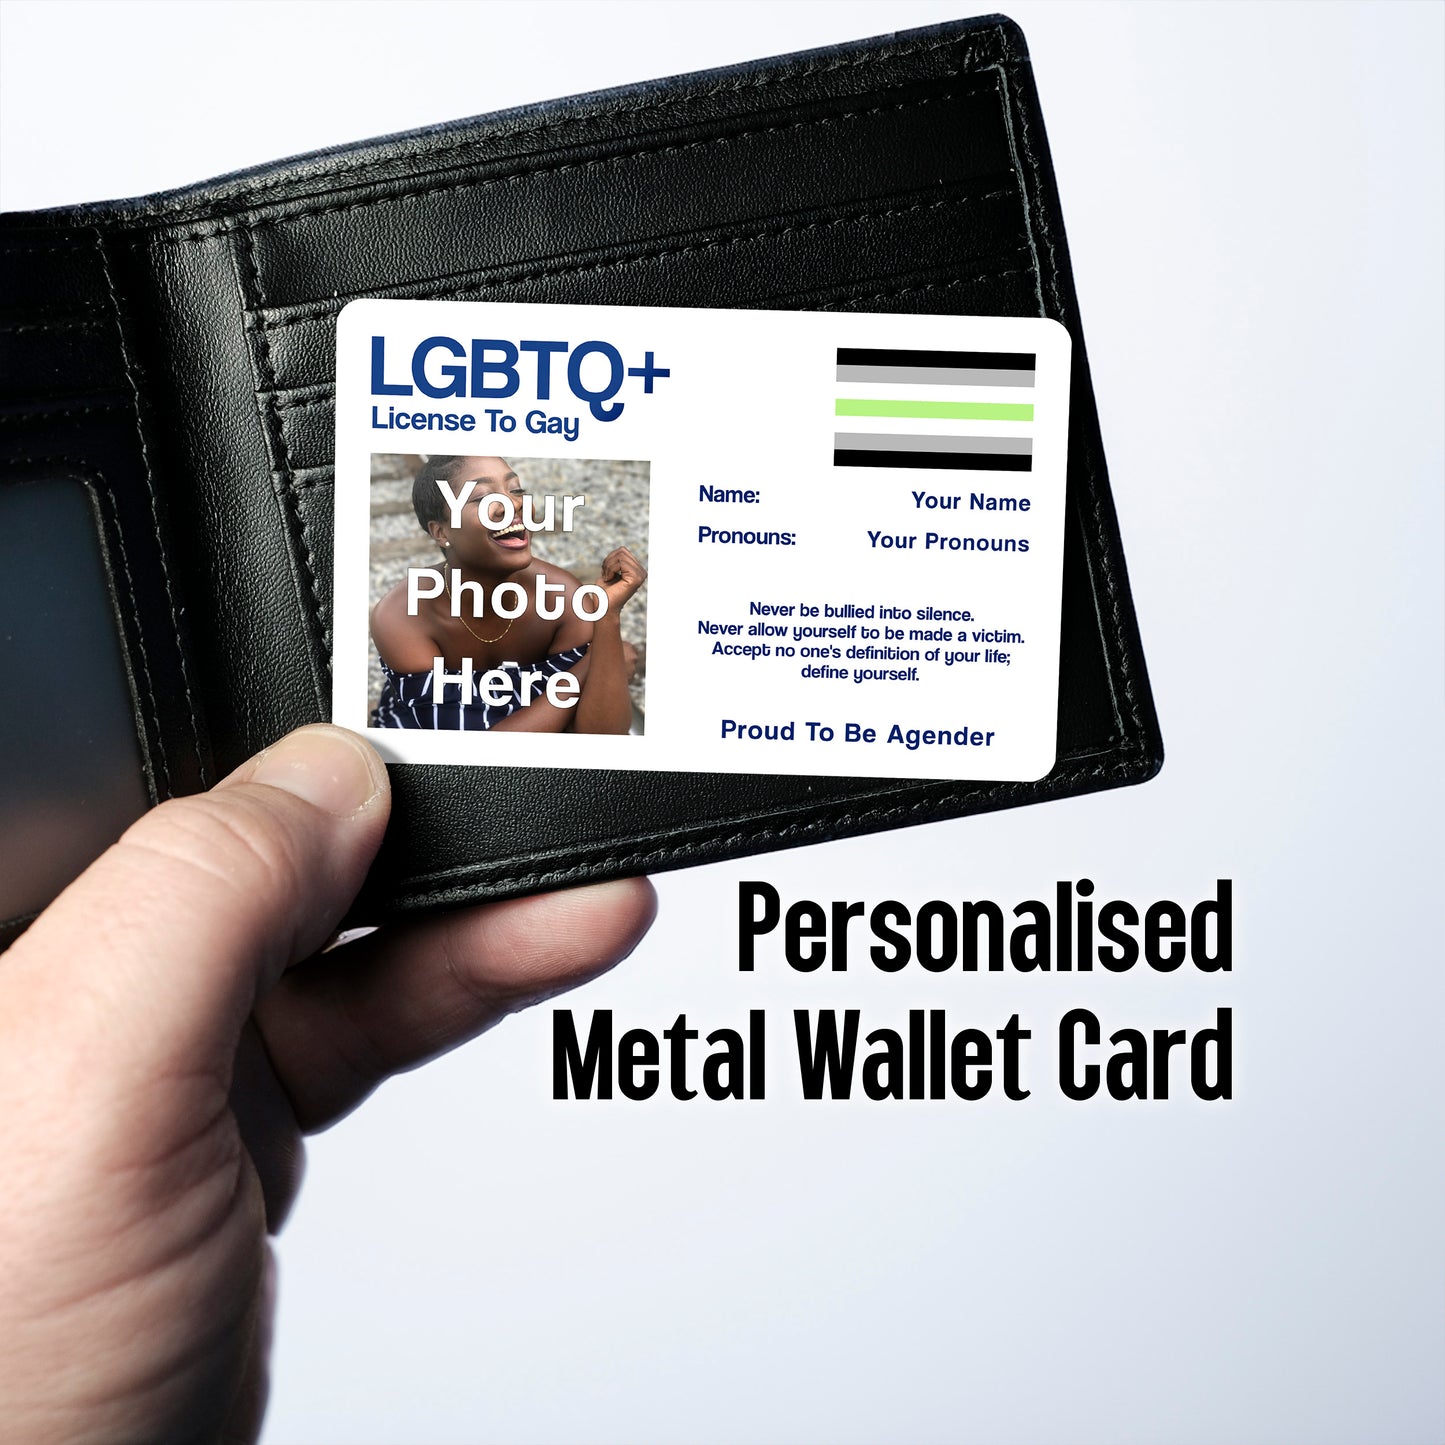 Agender license to gay aluminium wallet card personalised with your name, pronouns and photo